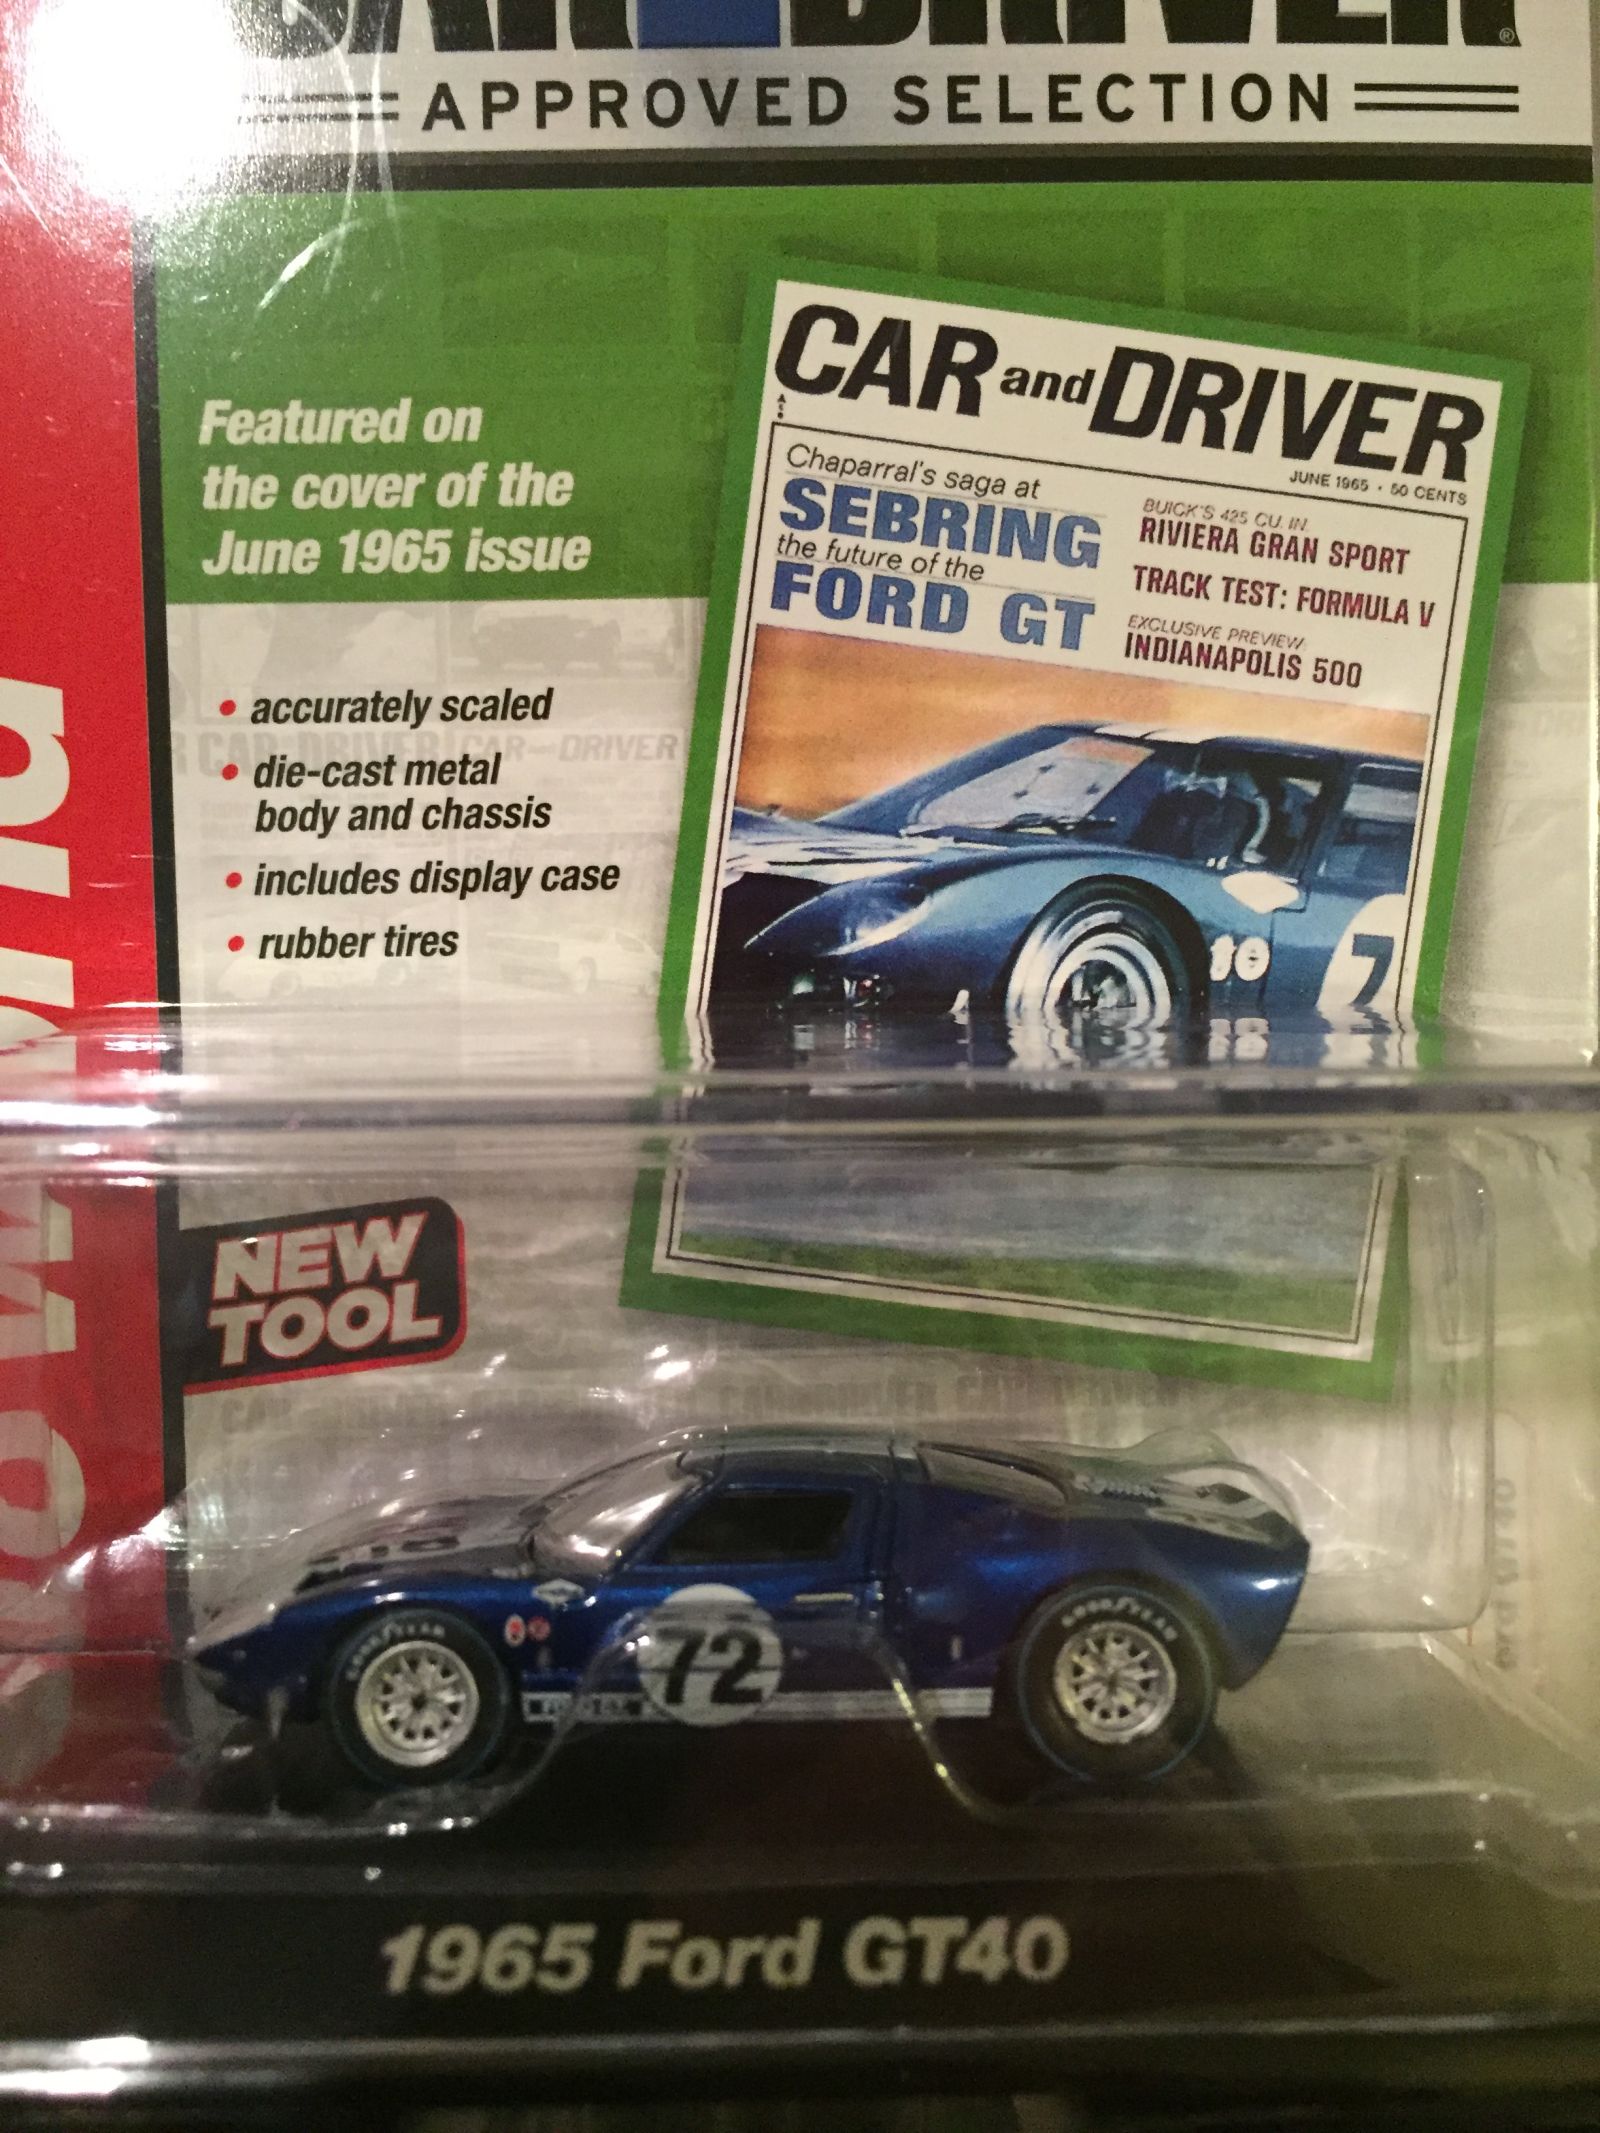 I finally got my hands on this blue AW GT40 from the bay. It was a very reasonable price $8 shipped. 